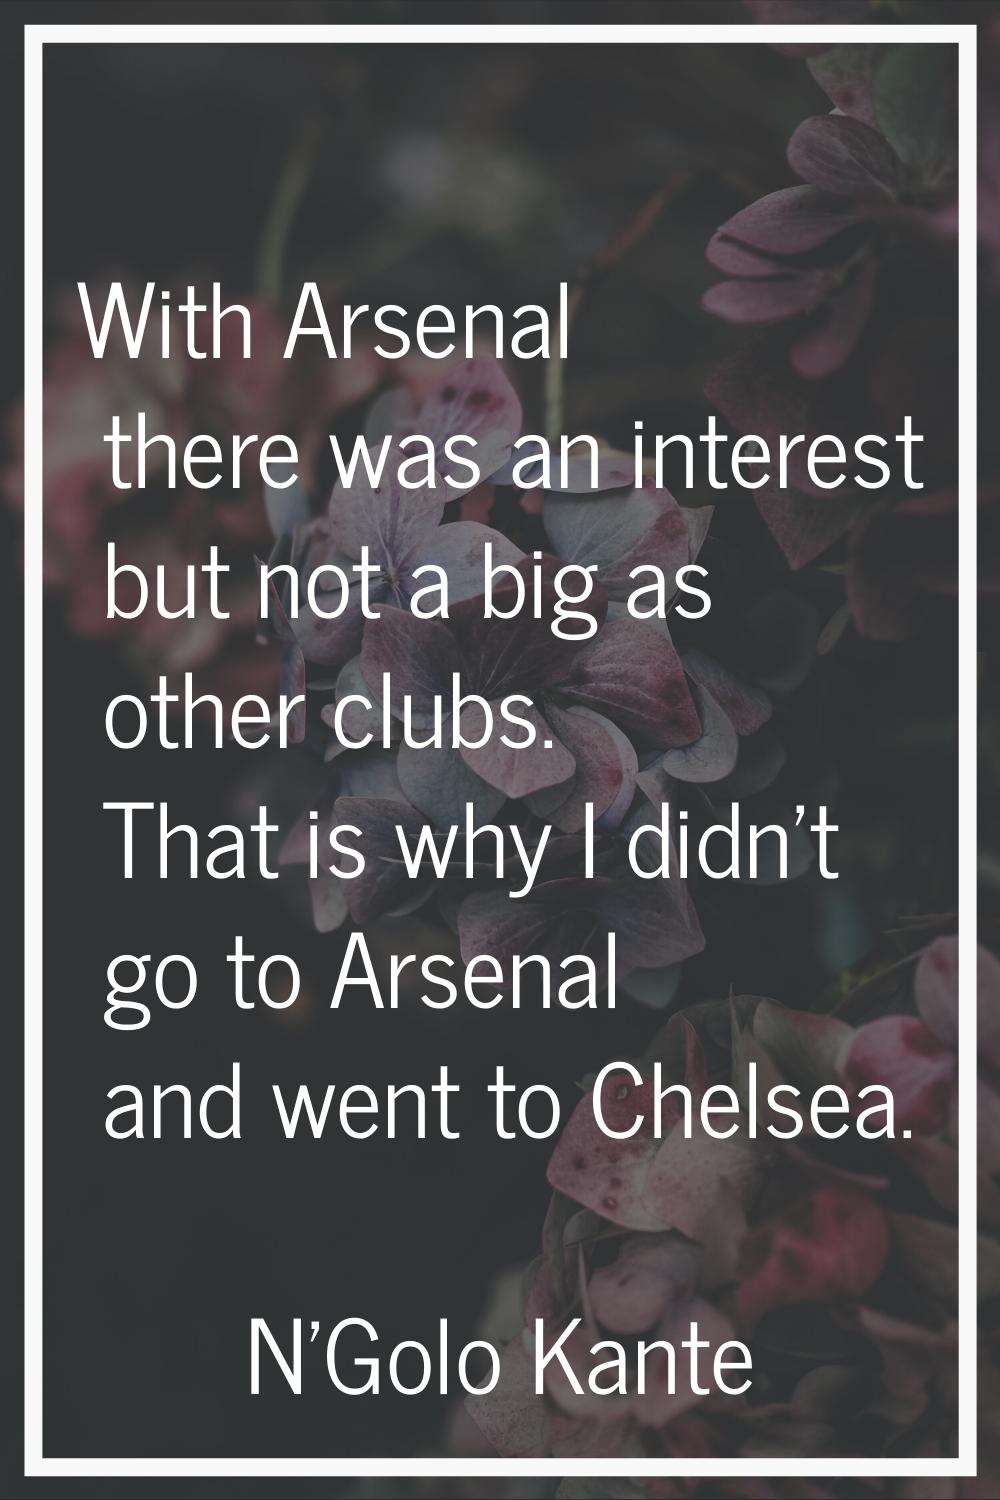 With Arsenal there was an interest but not a big as other clubs. That is why I didn't go to Arsenal